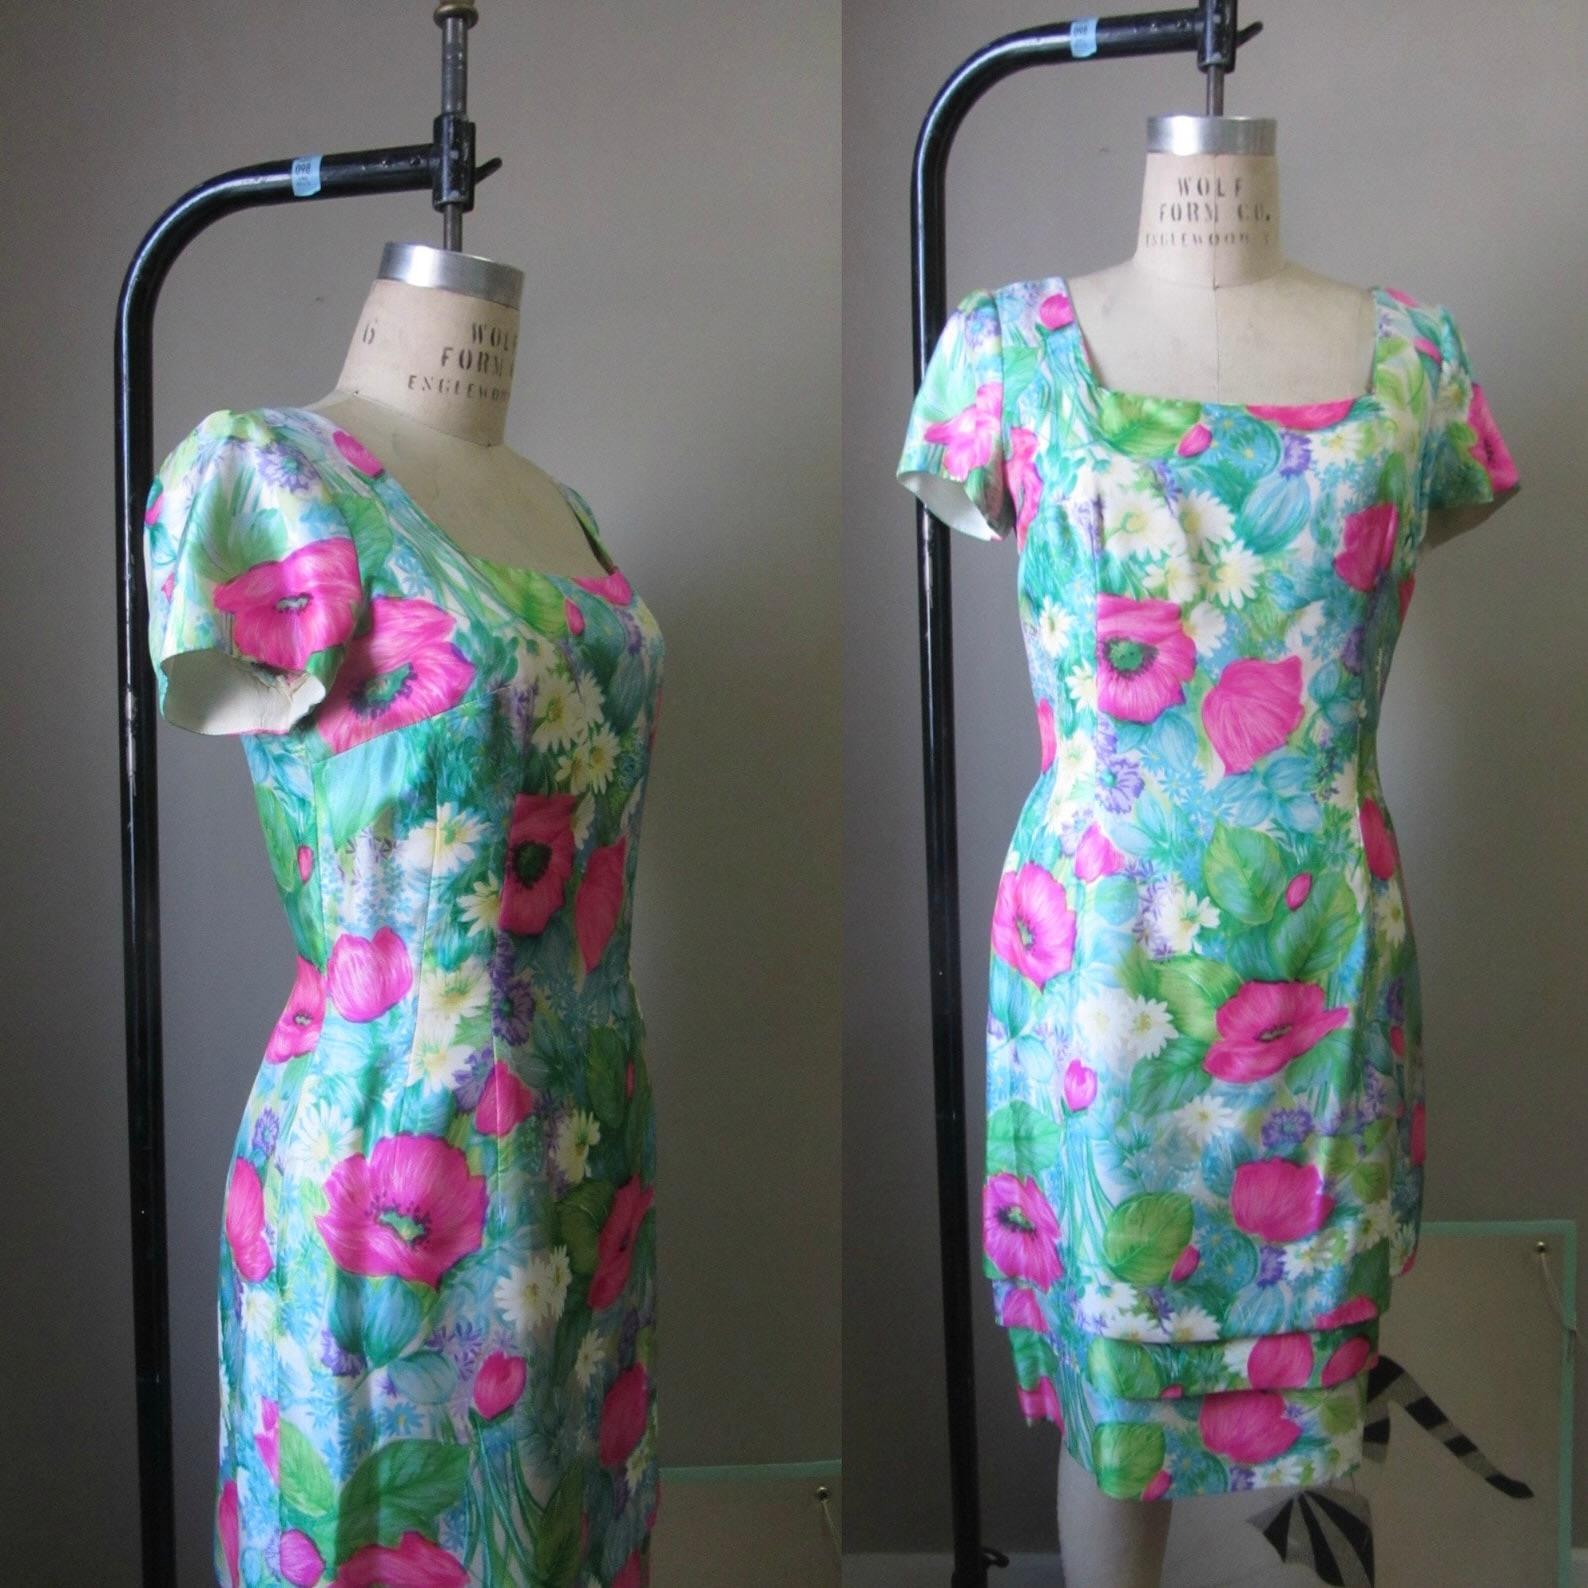 The most stunning vintage silk floral dress by Mr. Blackwell. sheath silhouette. square neck collar. short sleeves. tulip pleated hem. back zip closure with small bow at the top. falls to knee length. dress is lined.

Circa 1960s 
Mr. Blackwell